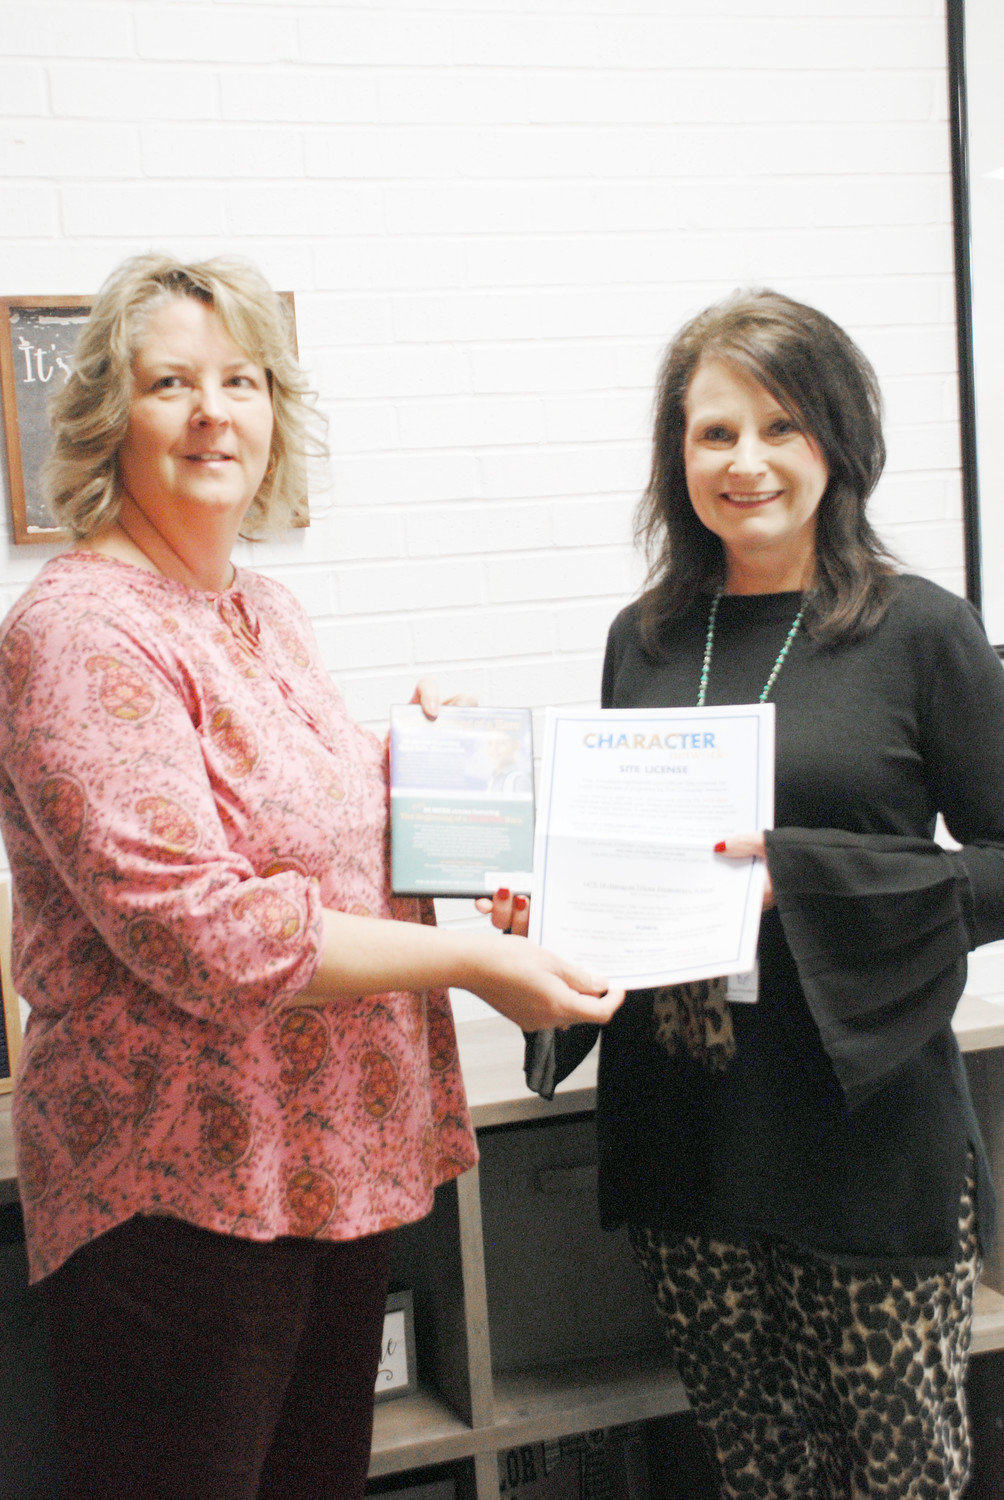 Susan Rogers from the Quitmann Pilot Club (left) presents The Beginning of a Hero anti-bulling program to Tracey Helfferich, Acting Superintendent of Yantis ISD and the Principal of Imogene Glenn Elementary School.